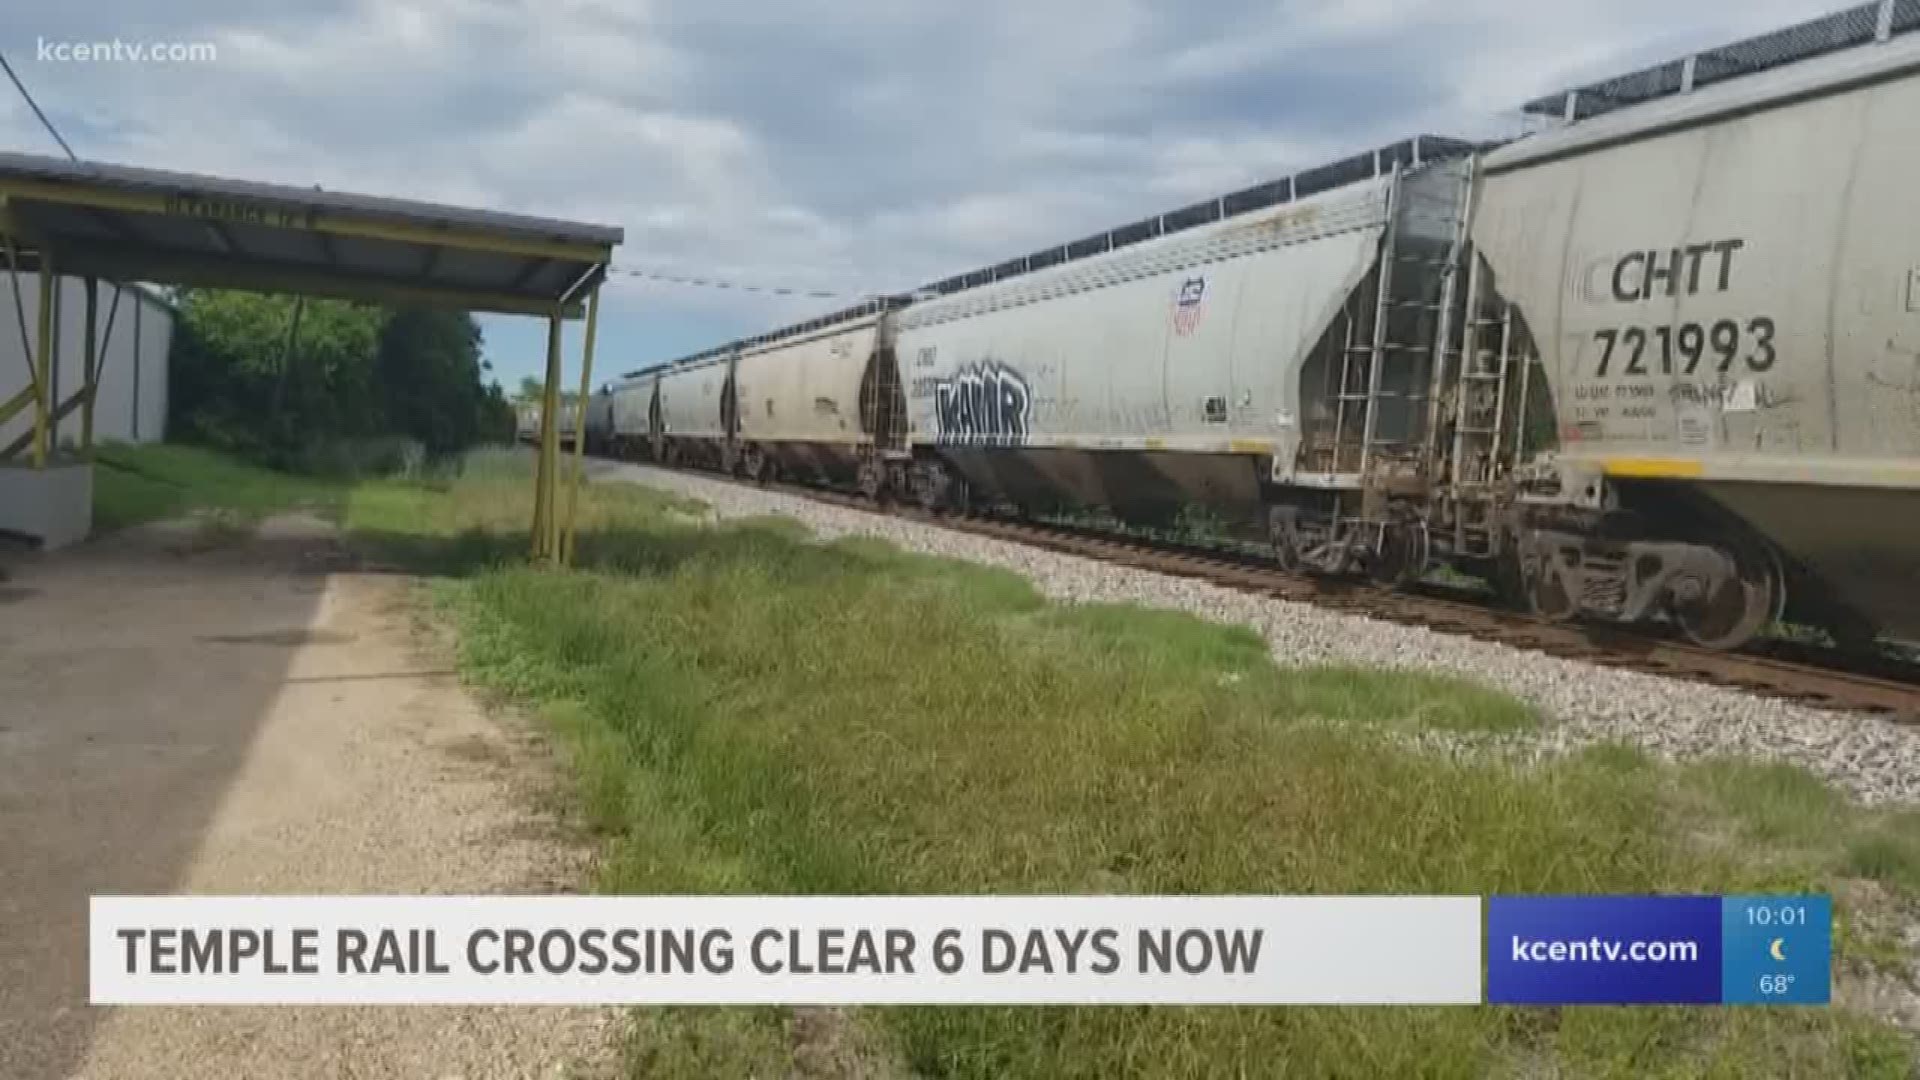 After a Temple woman contacted KCEN Channel 6 about her neighborhood being trapped, sometimes for hours, by Union Pacific trains, the trains haven't blocked the neighborhood in six days.